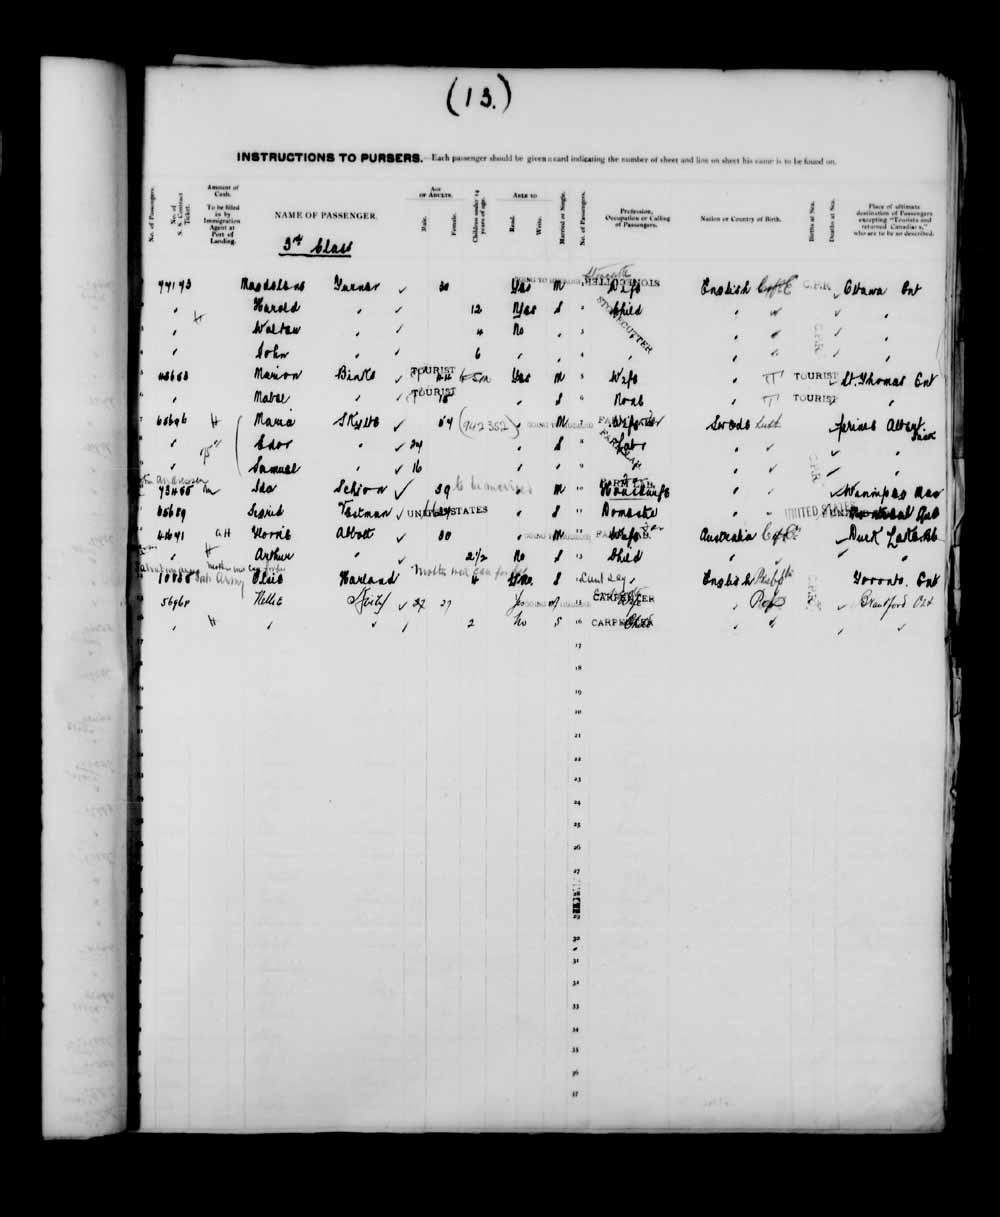 Digitized page of Quebec Passenger Lists for Image No.: e003591263